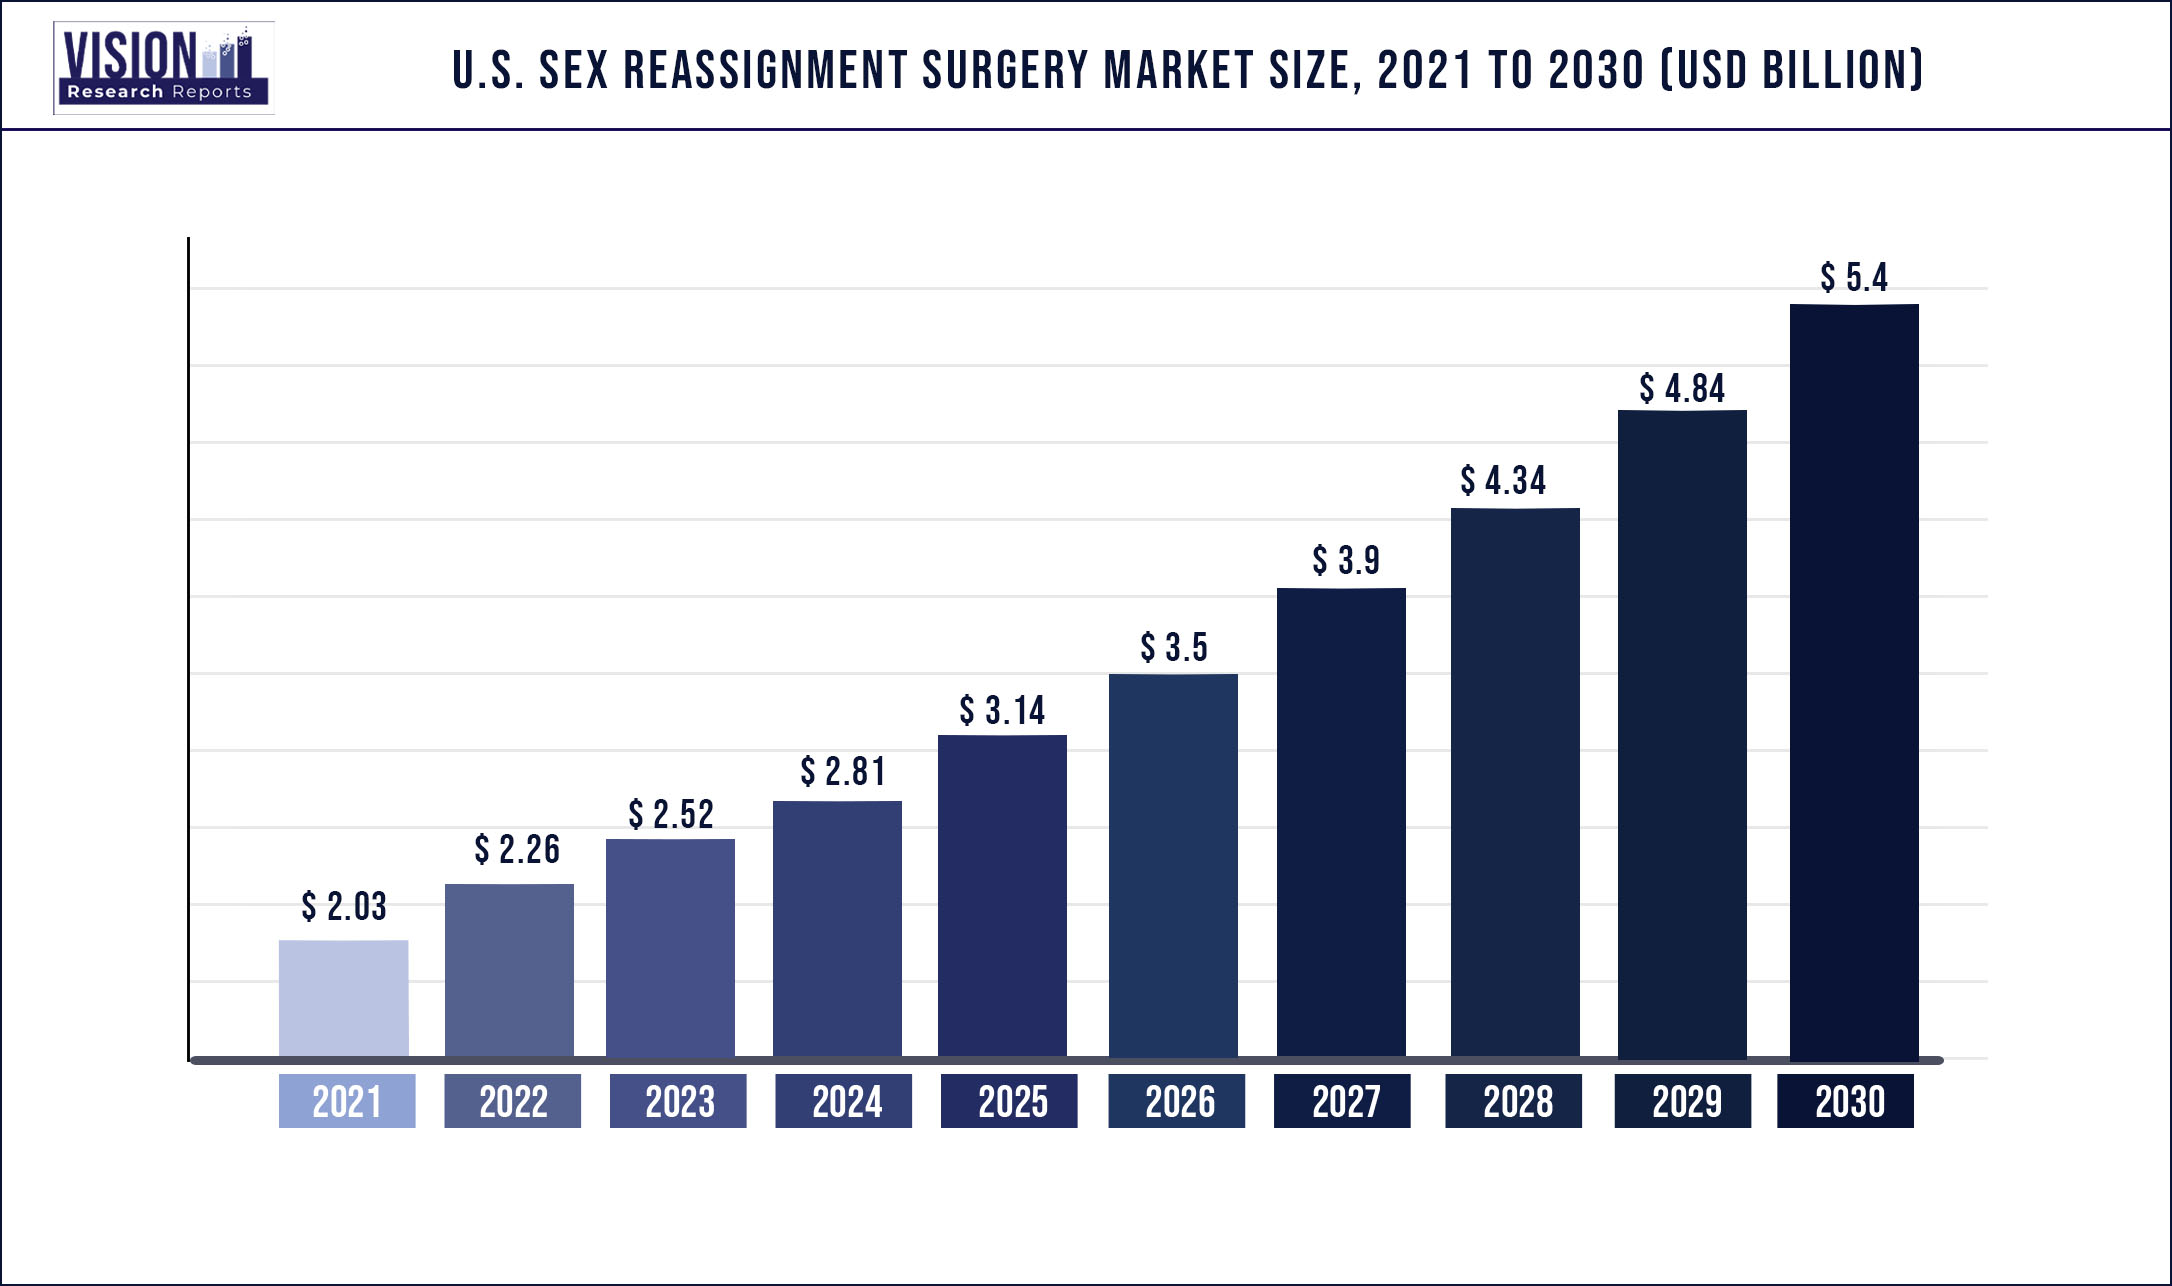 U.S. Sex Reassignment Surgery Market Size 2021 to 2030